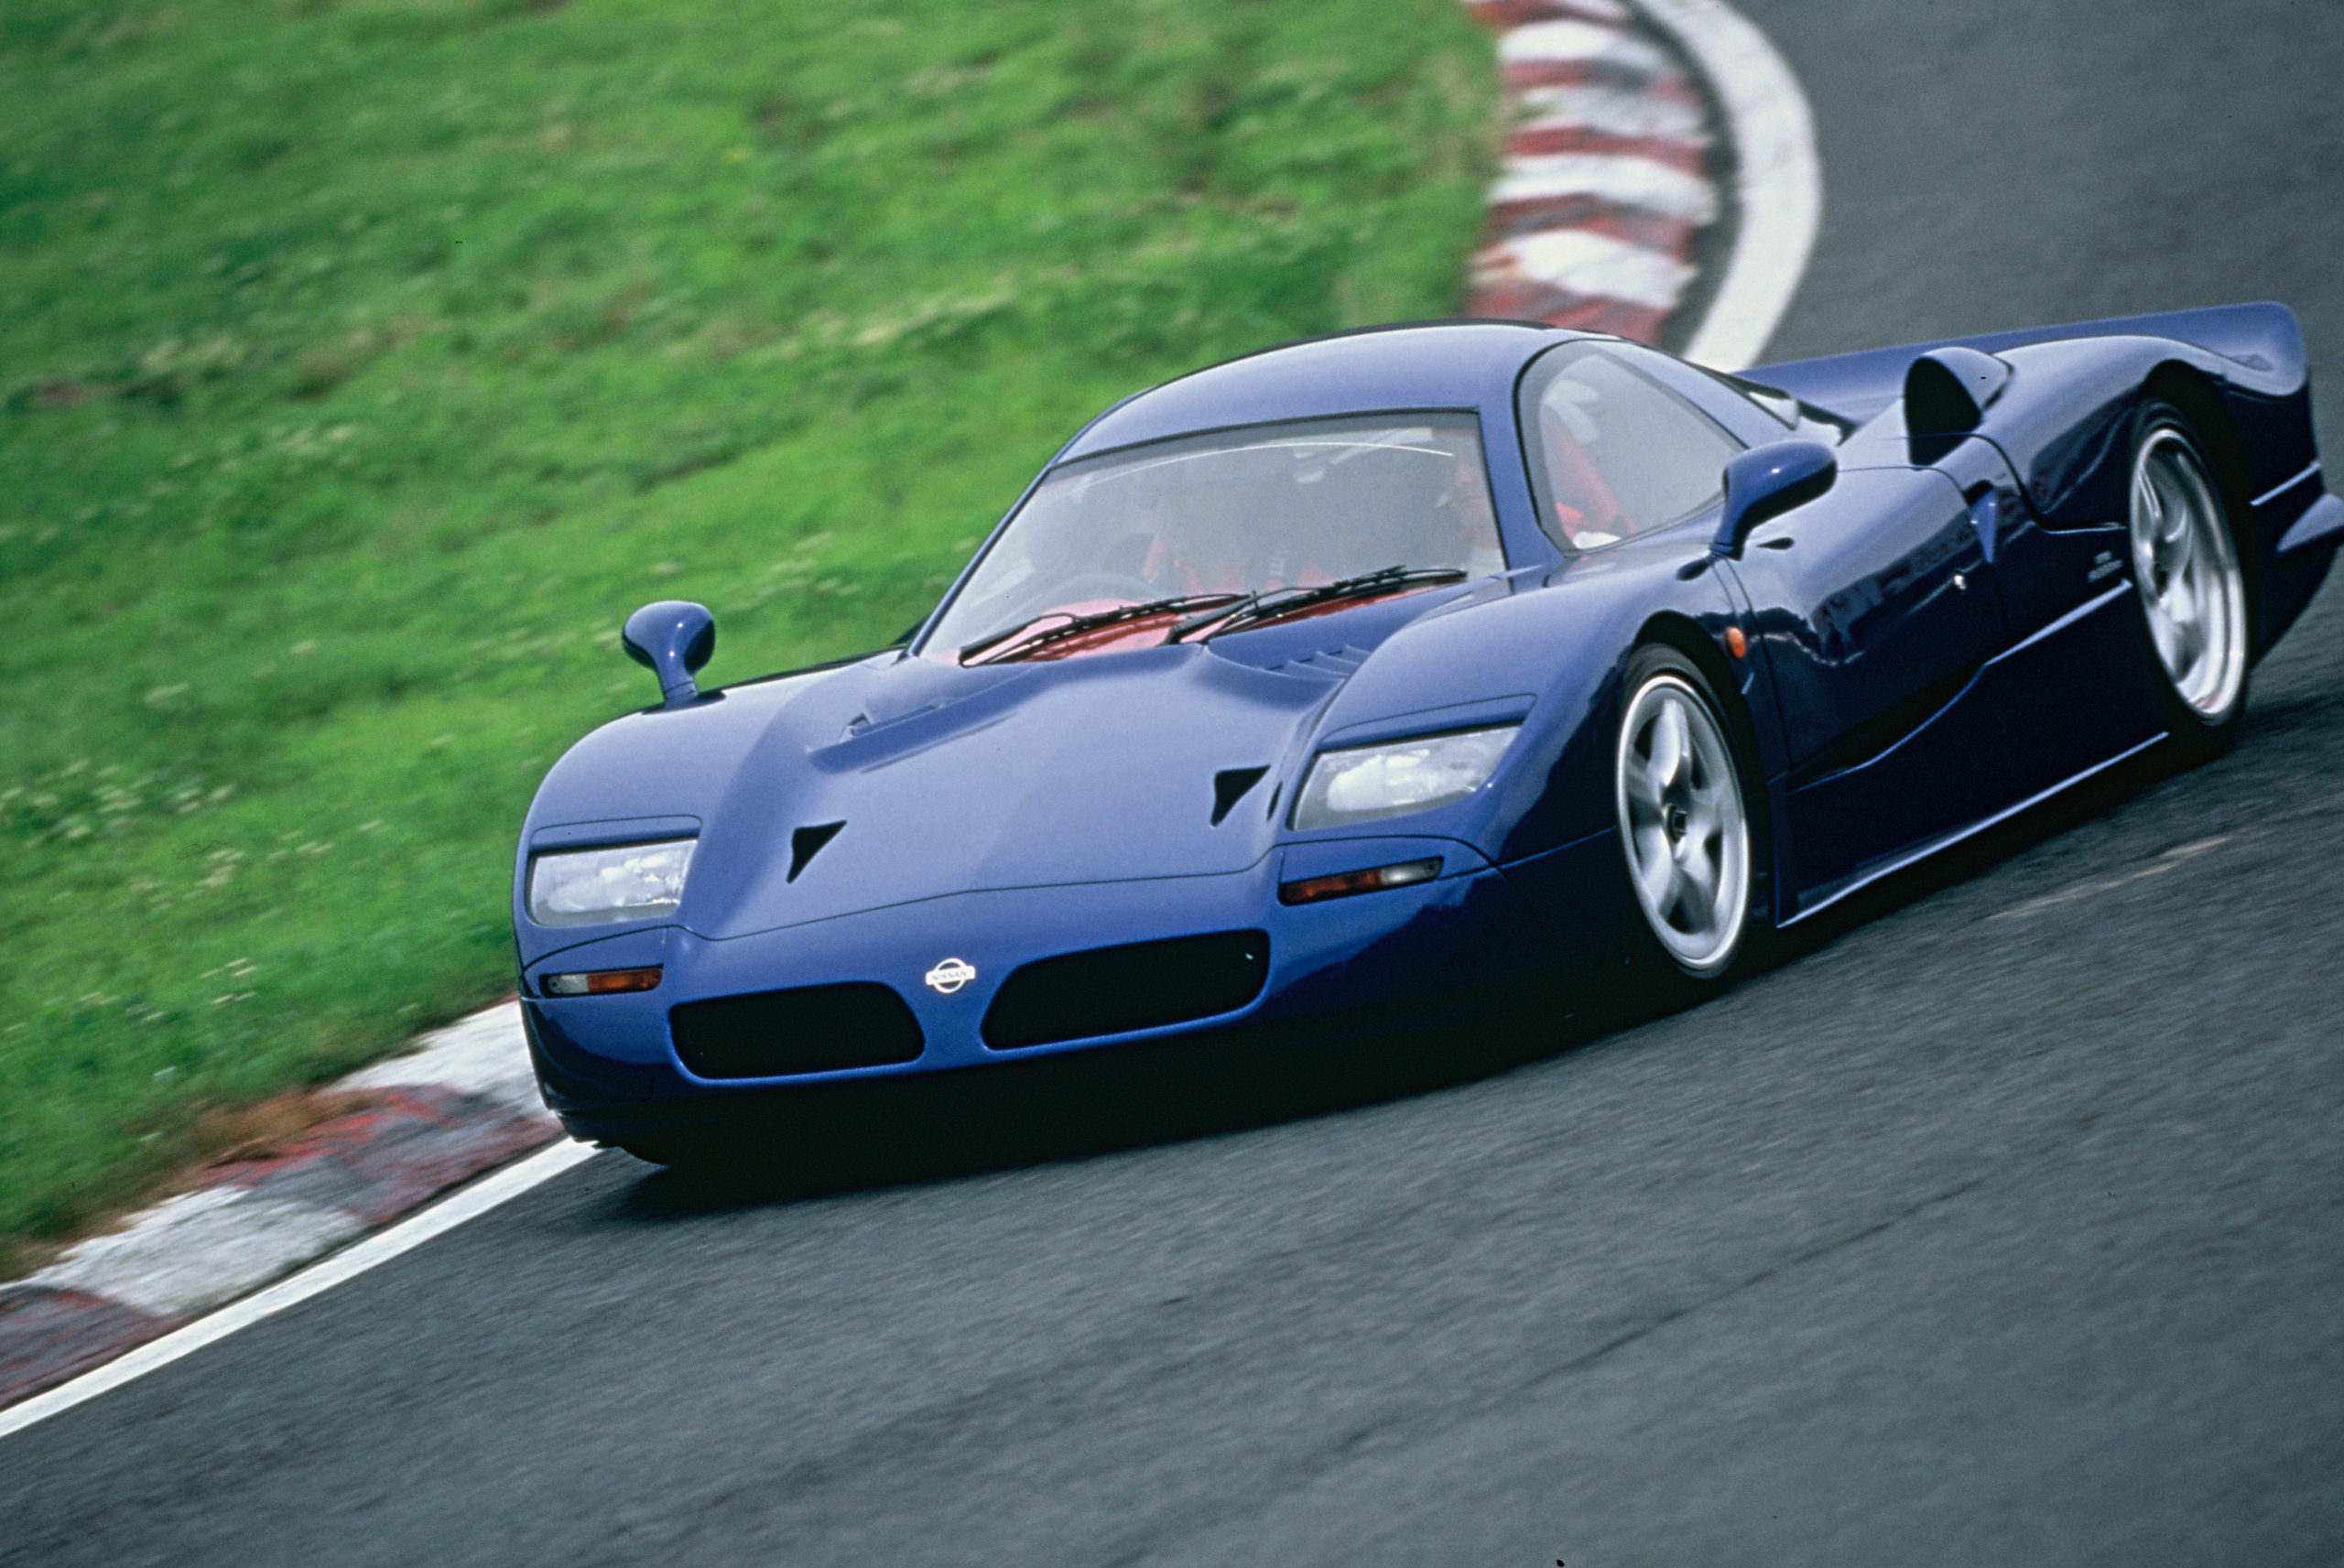 Nissan R390 GT1 rodable